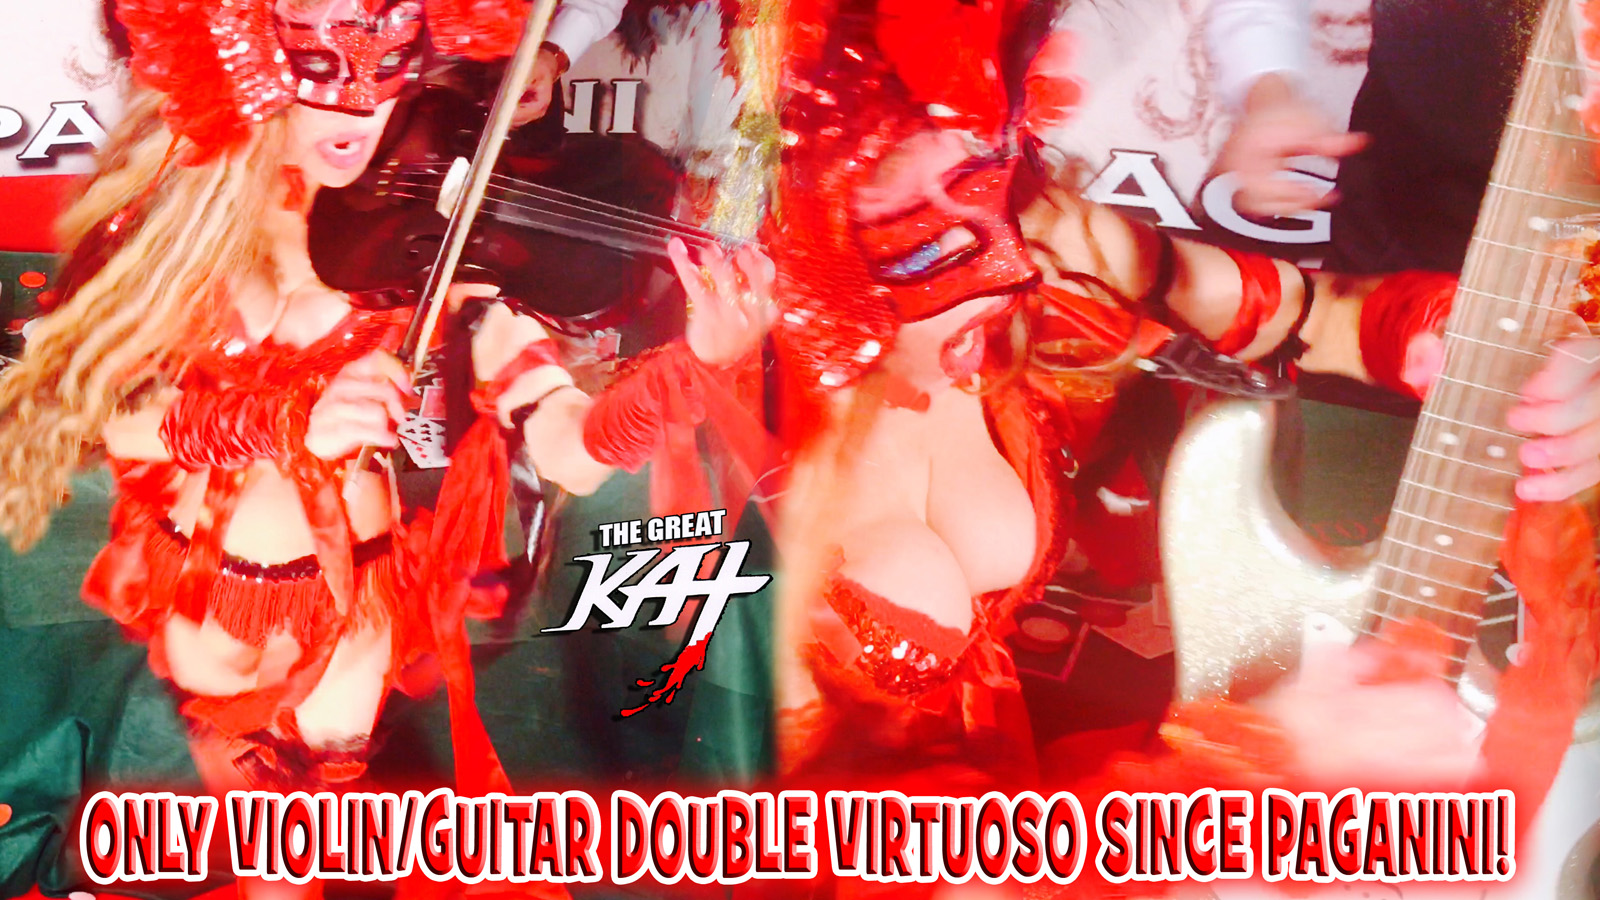 ONLY VIOLIN/GUITAR DOUBLE VIRTUOSO SINCE PAGANINI! From CHEF GREAT KAT COOKS PAGANINI'S RAVIOLI!